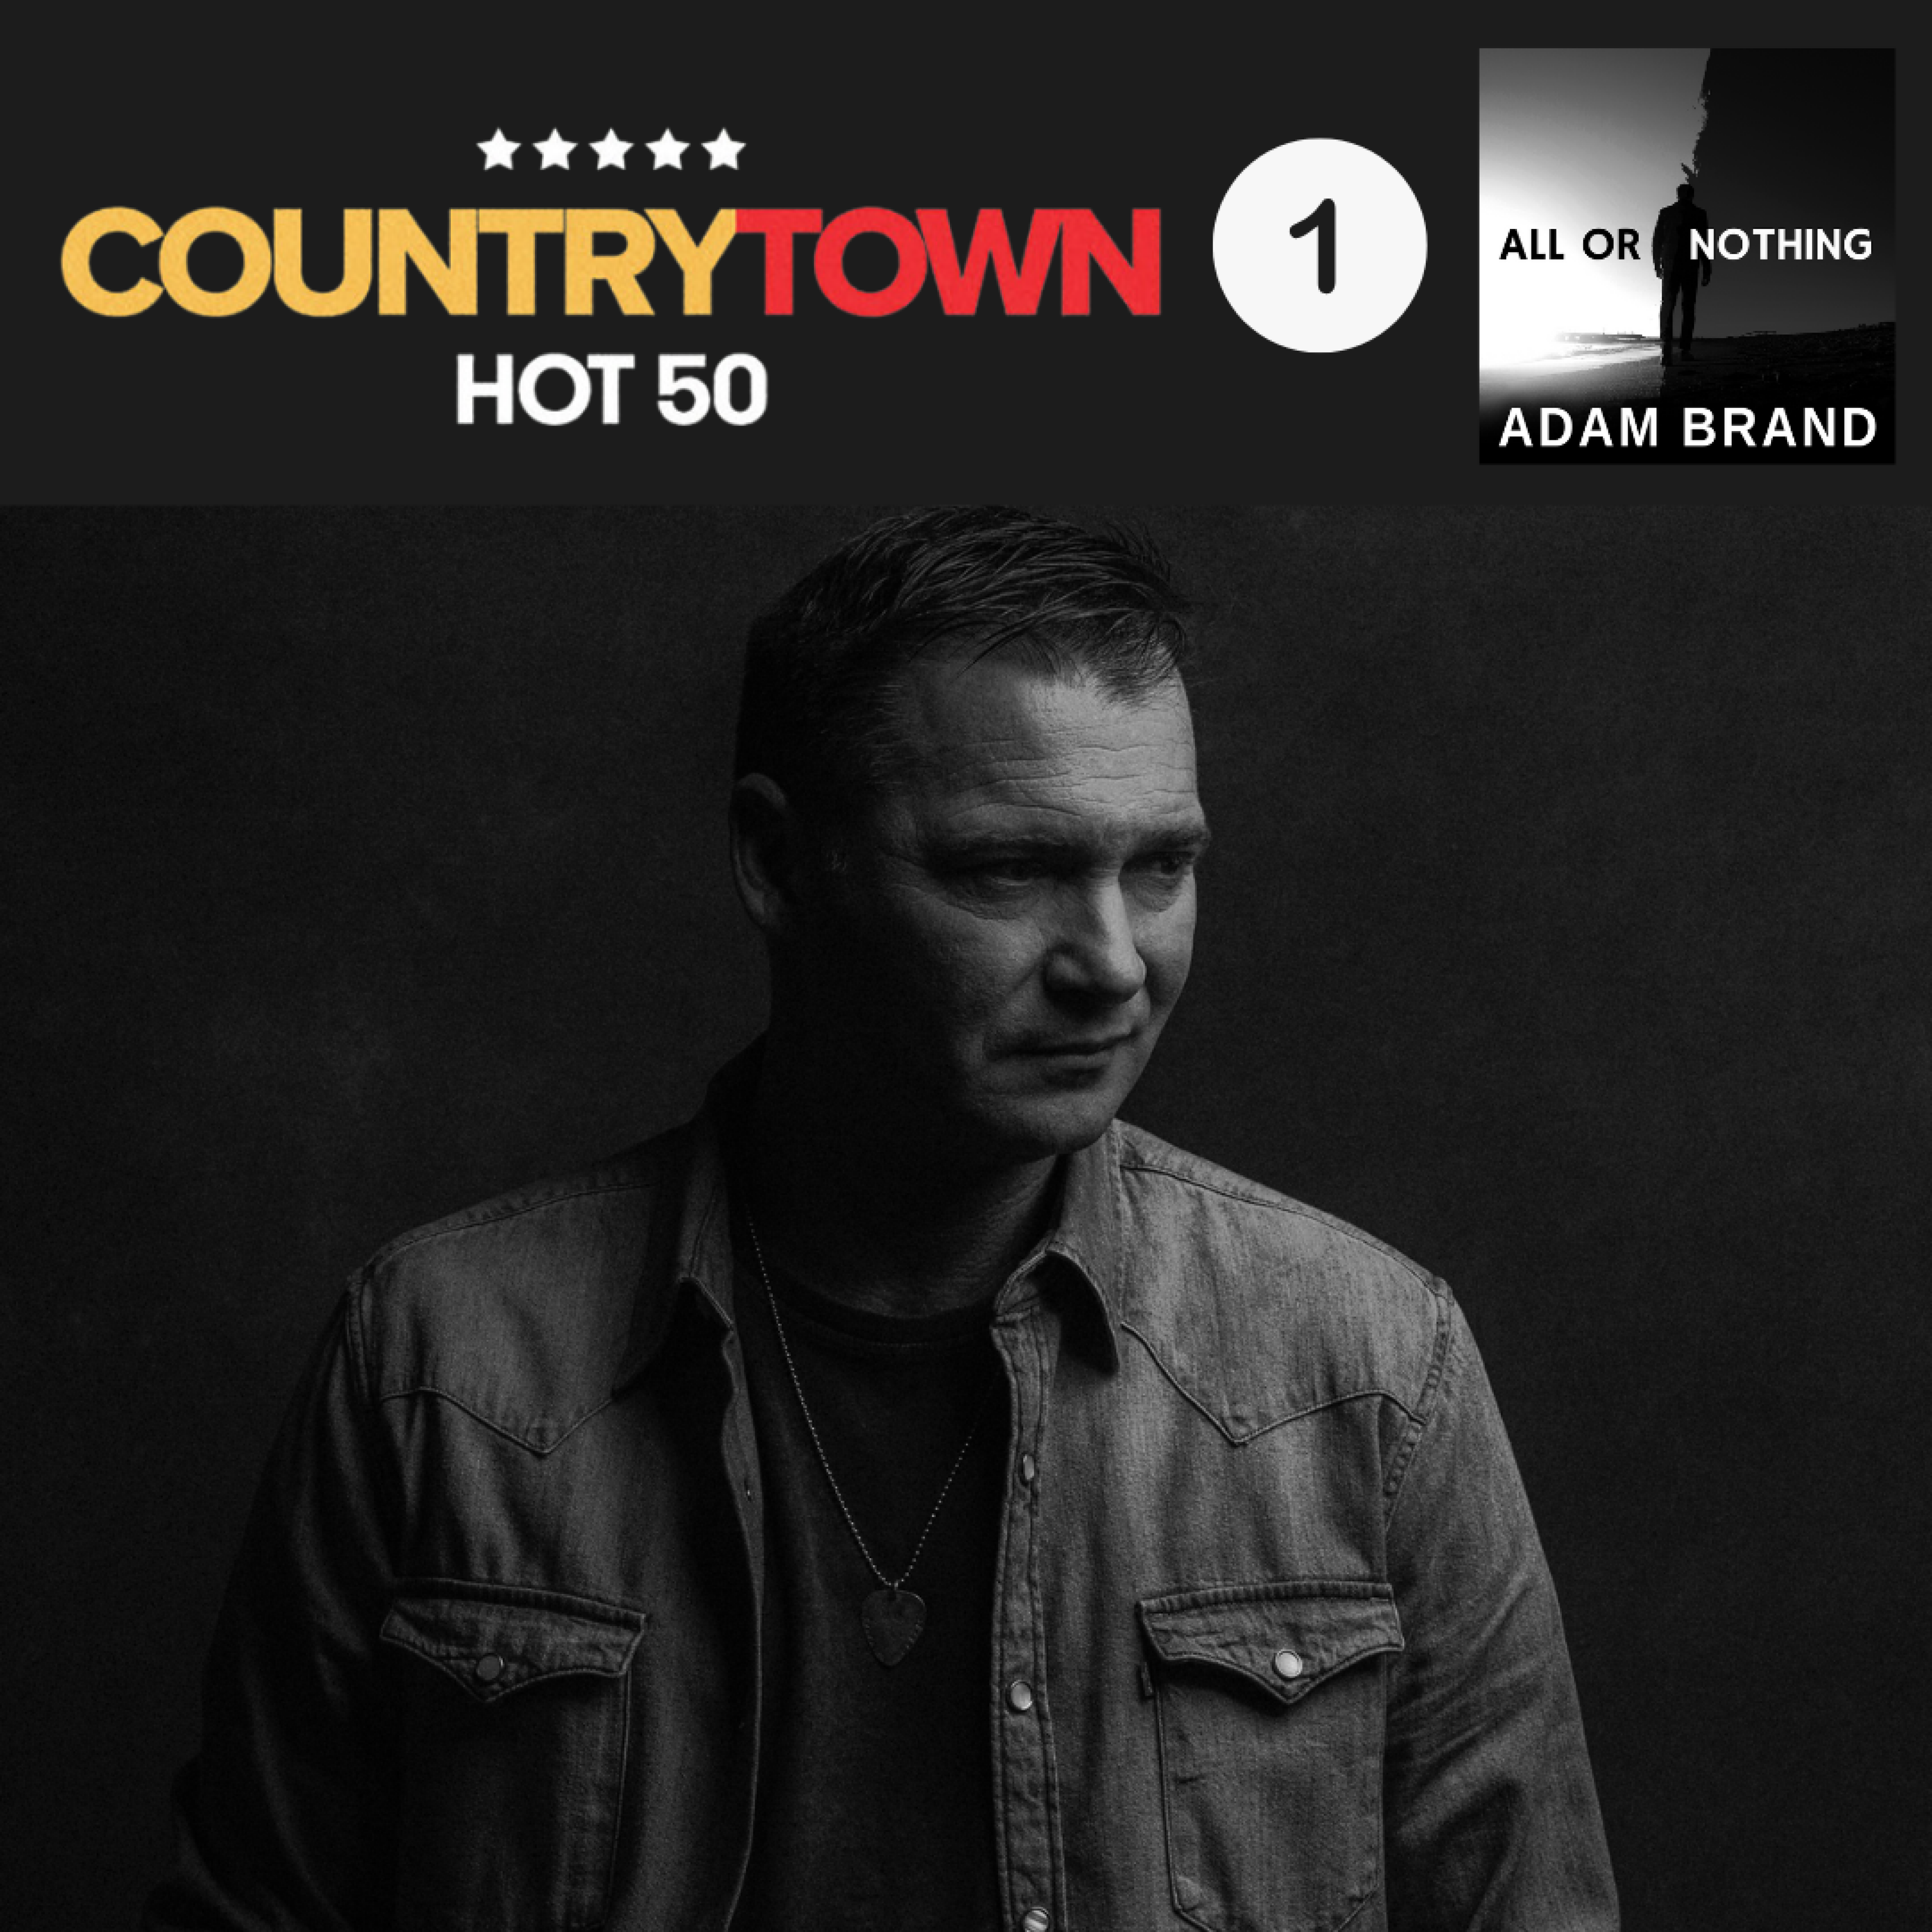 Adam Brand - 'All Or Nothing' #1 on the National Country Airplay Charts